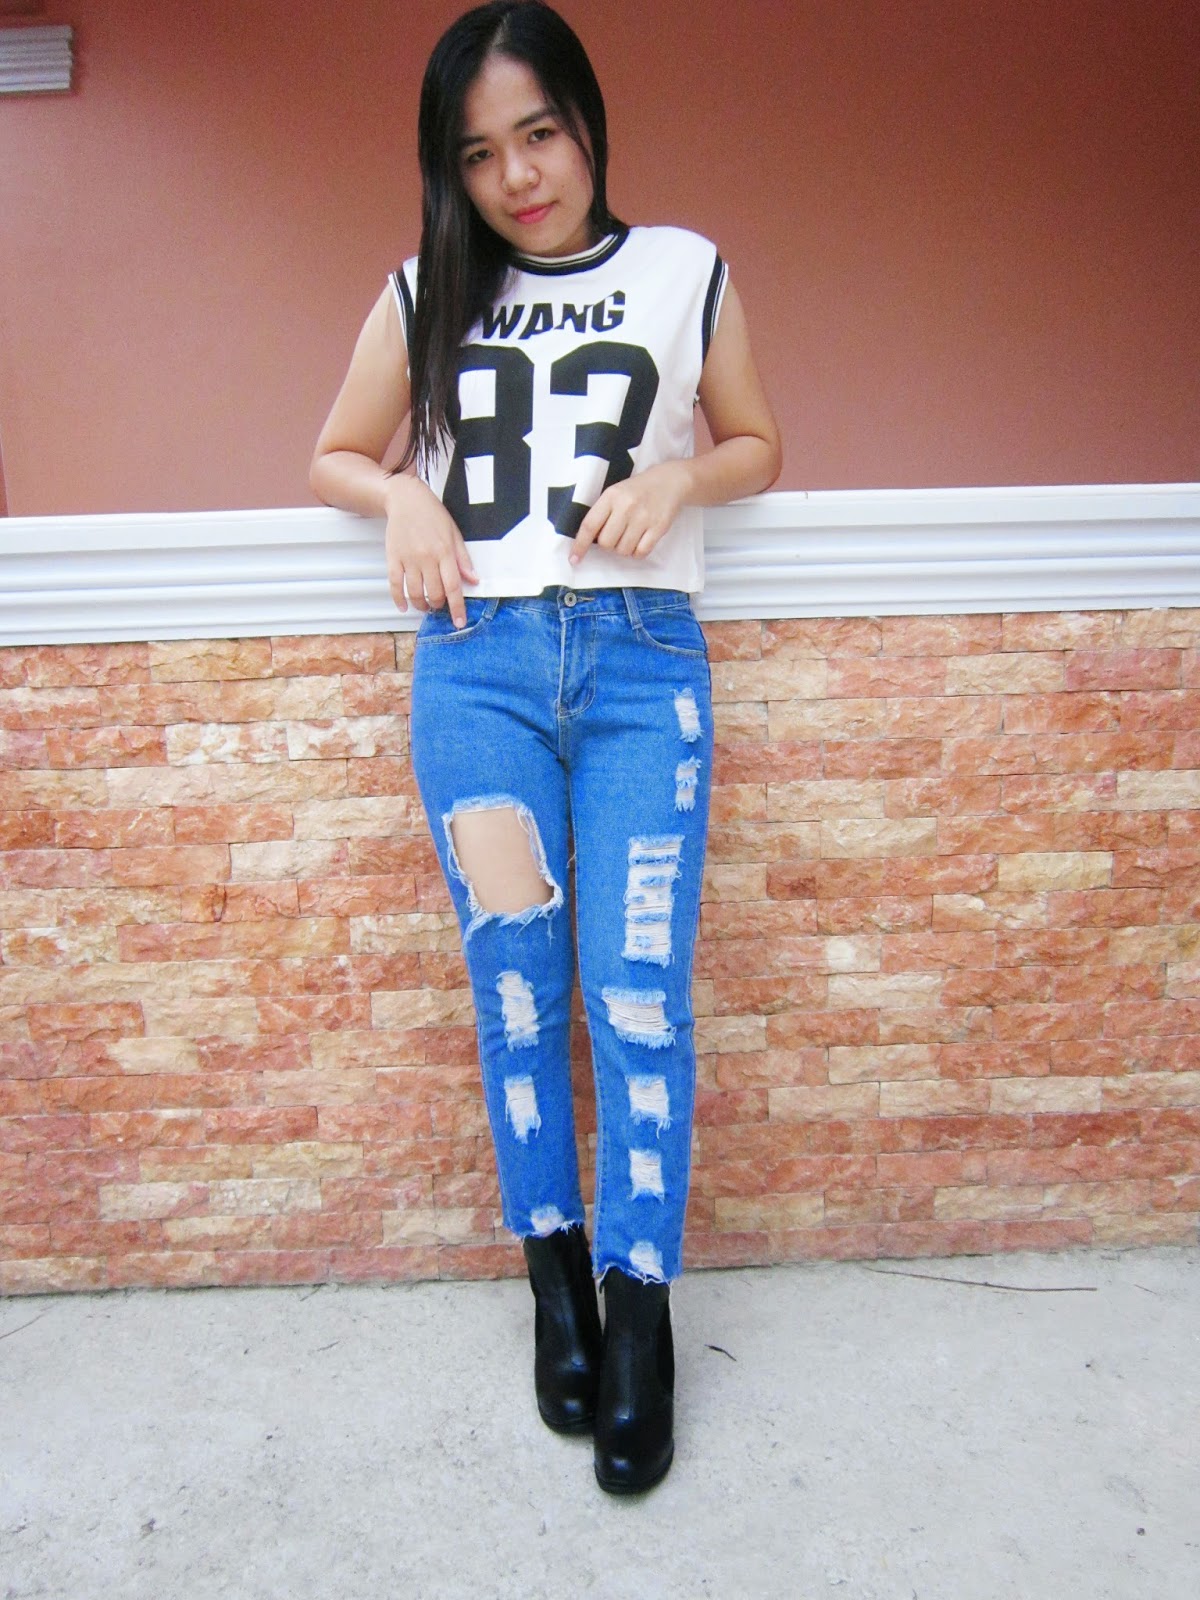 distressed jeans